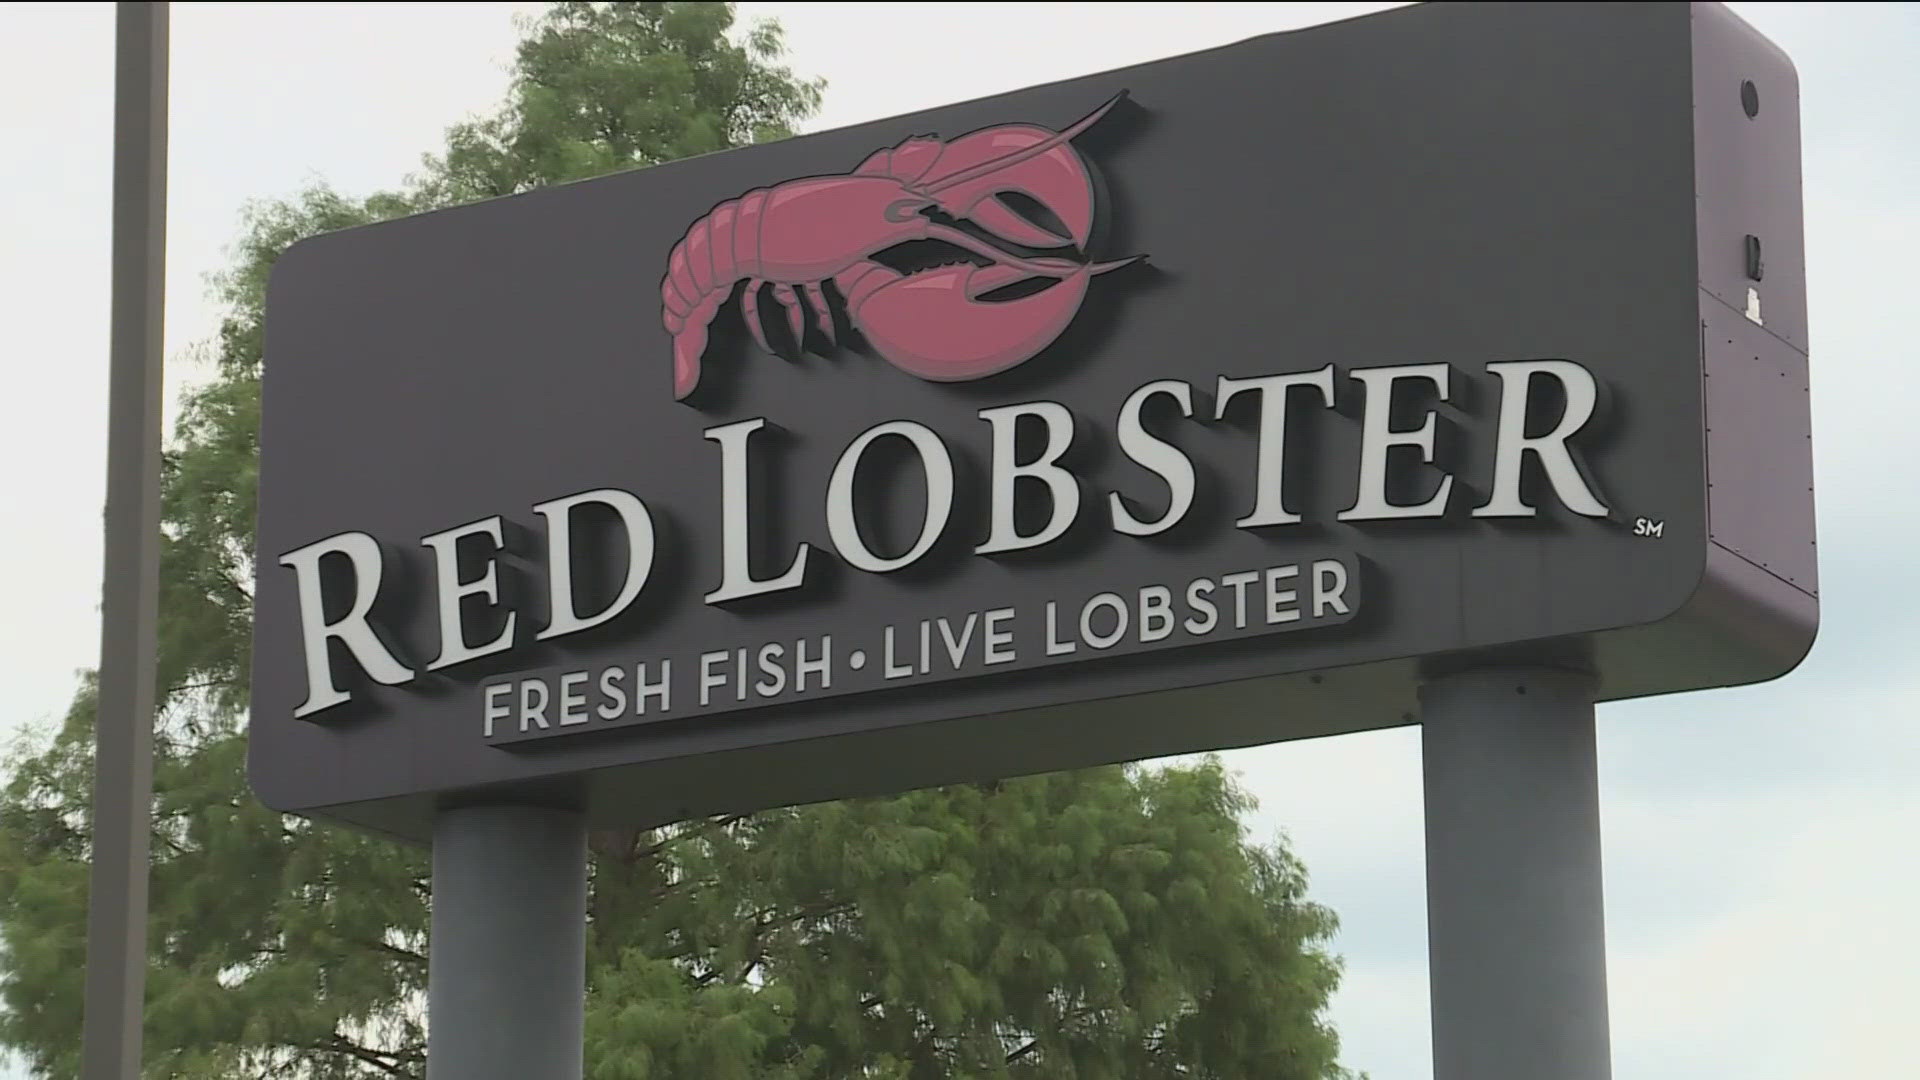 Red Lobster, which abruptly shut down more than 50 locations Monday, has yet to say anything publicly about the closures.